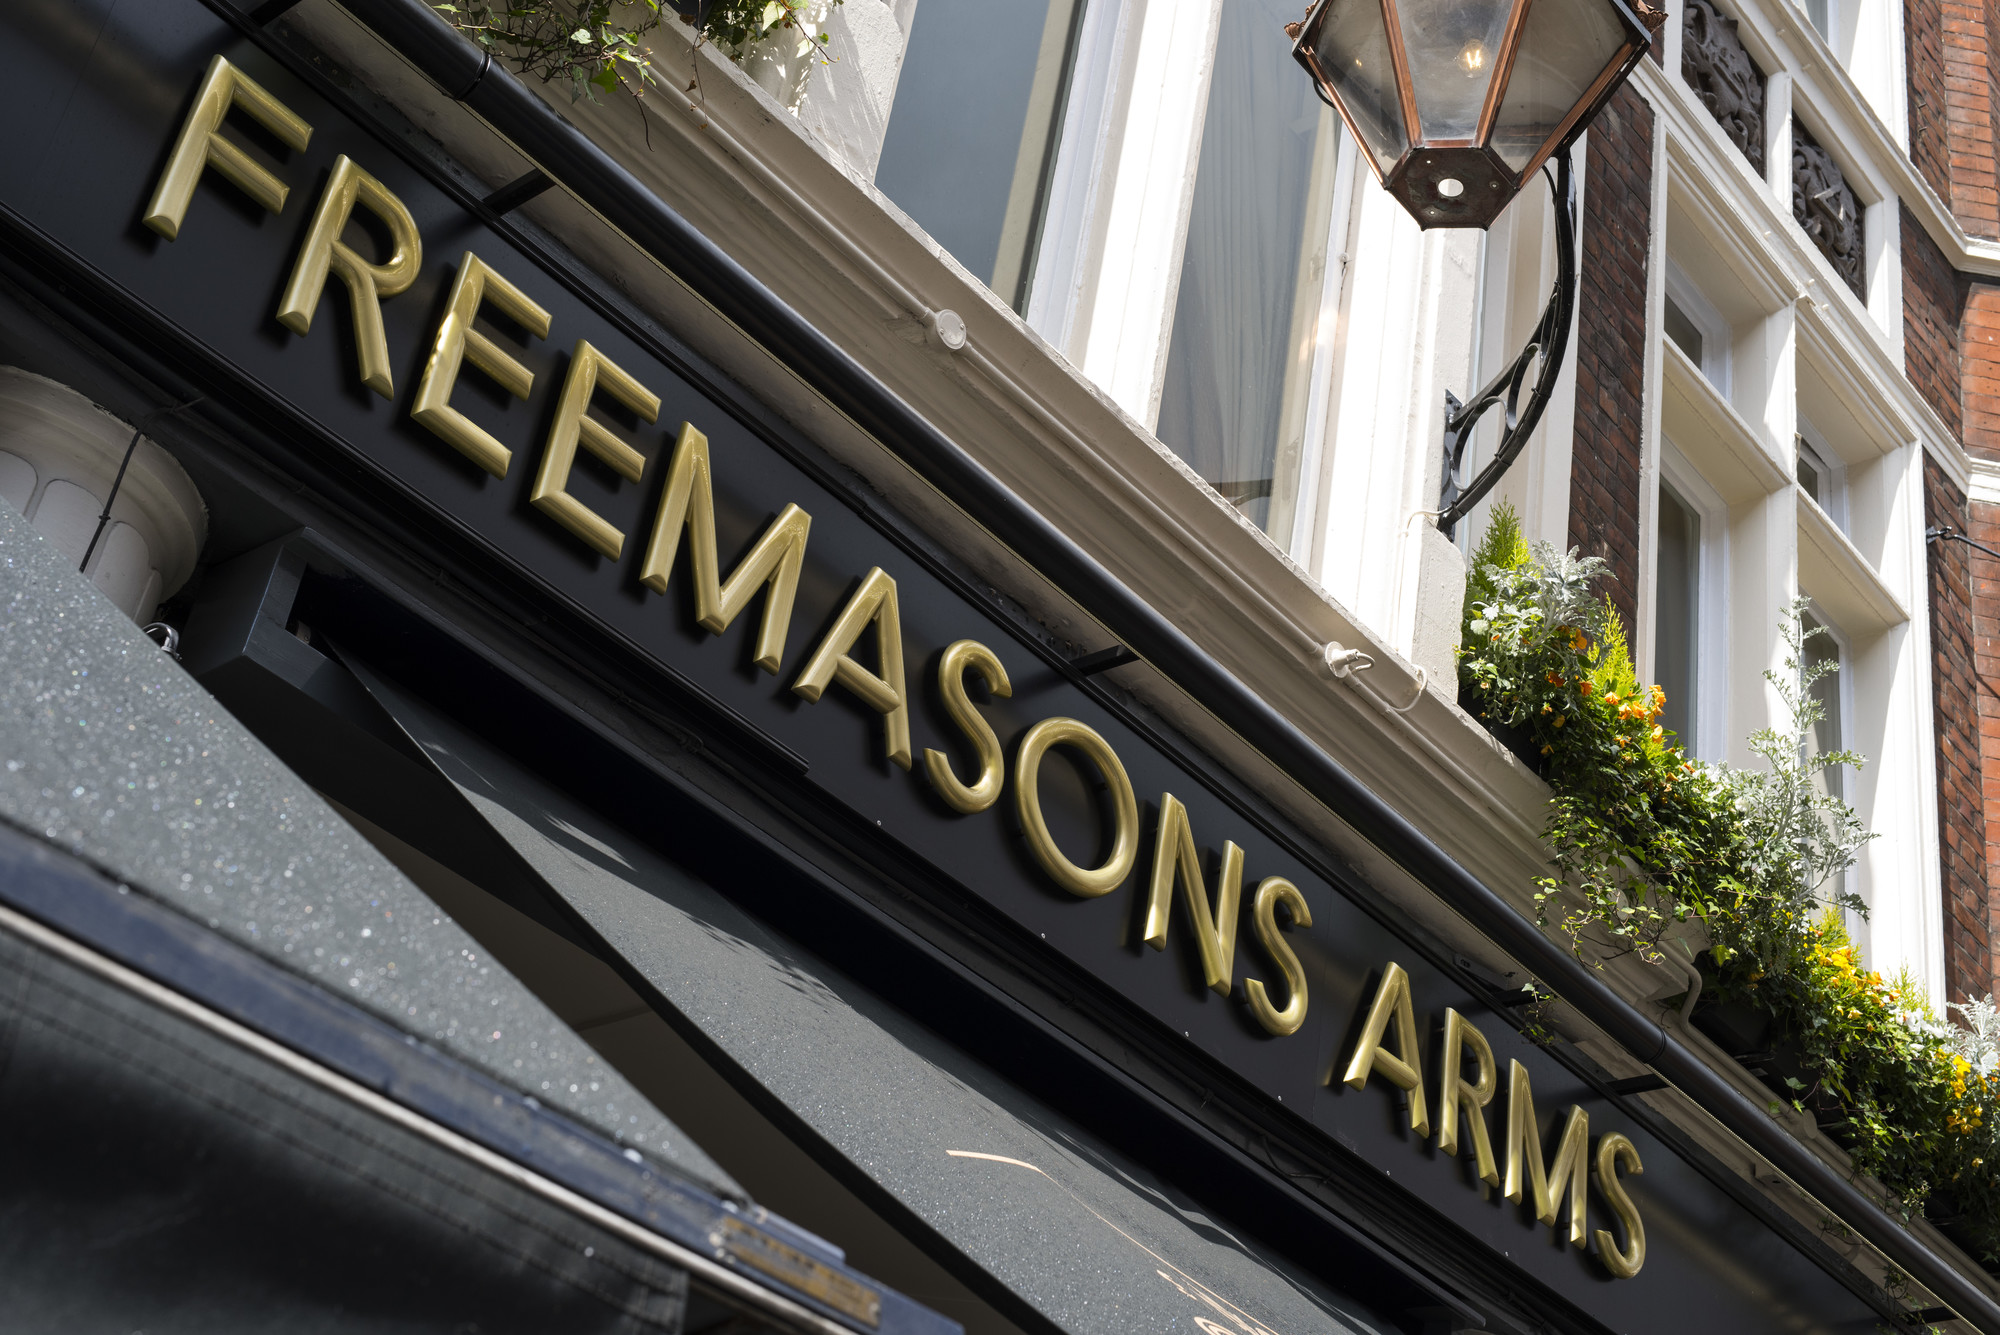 Freemasons Arms pub fascia with gold lettering on sleek black background